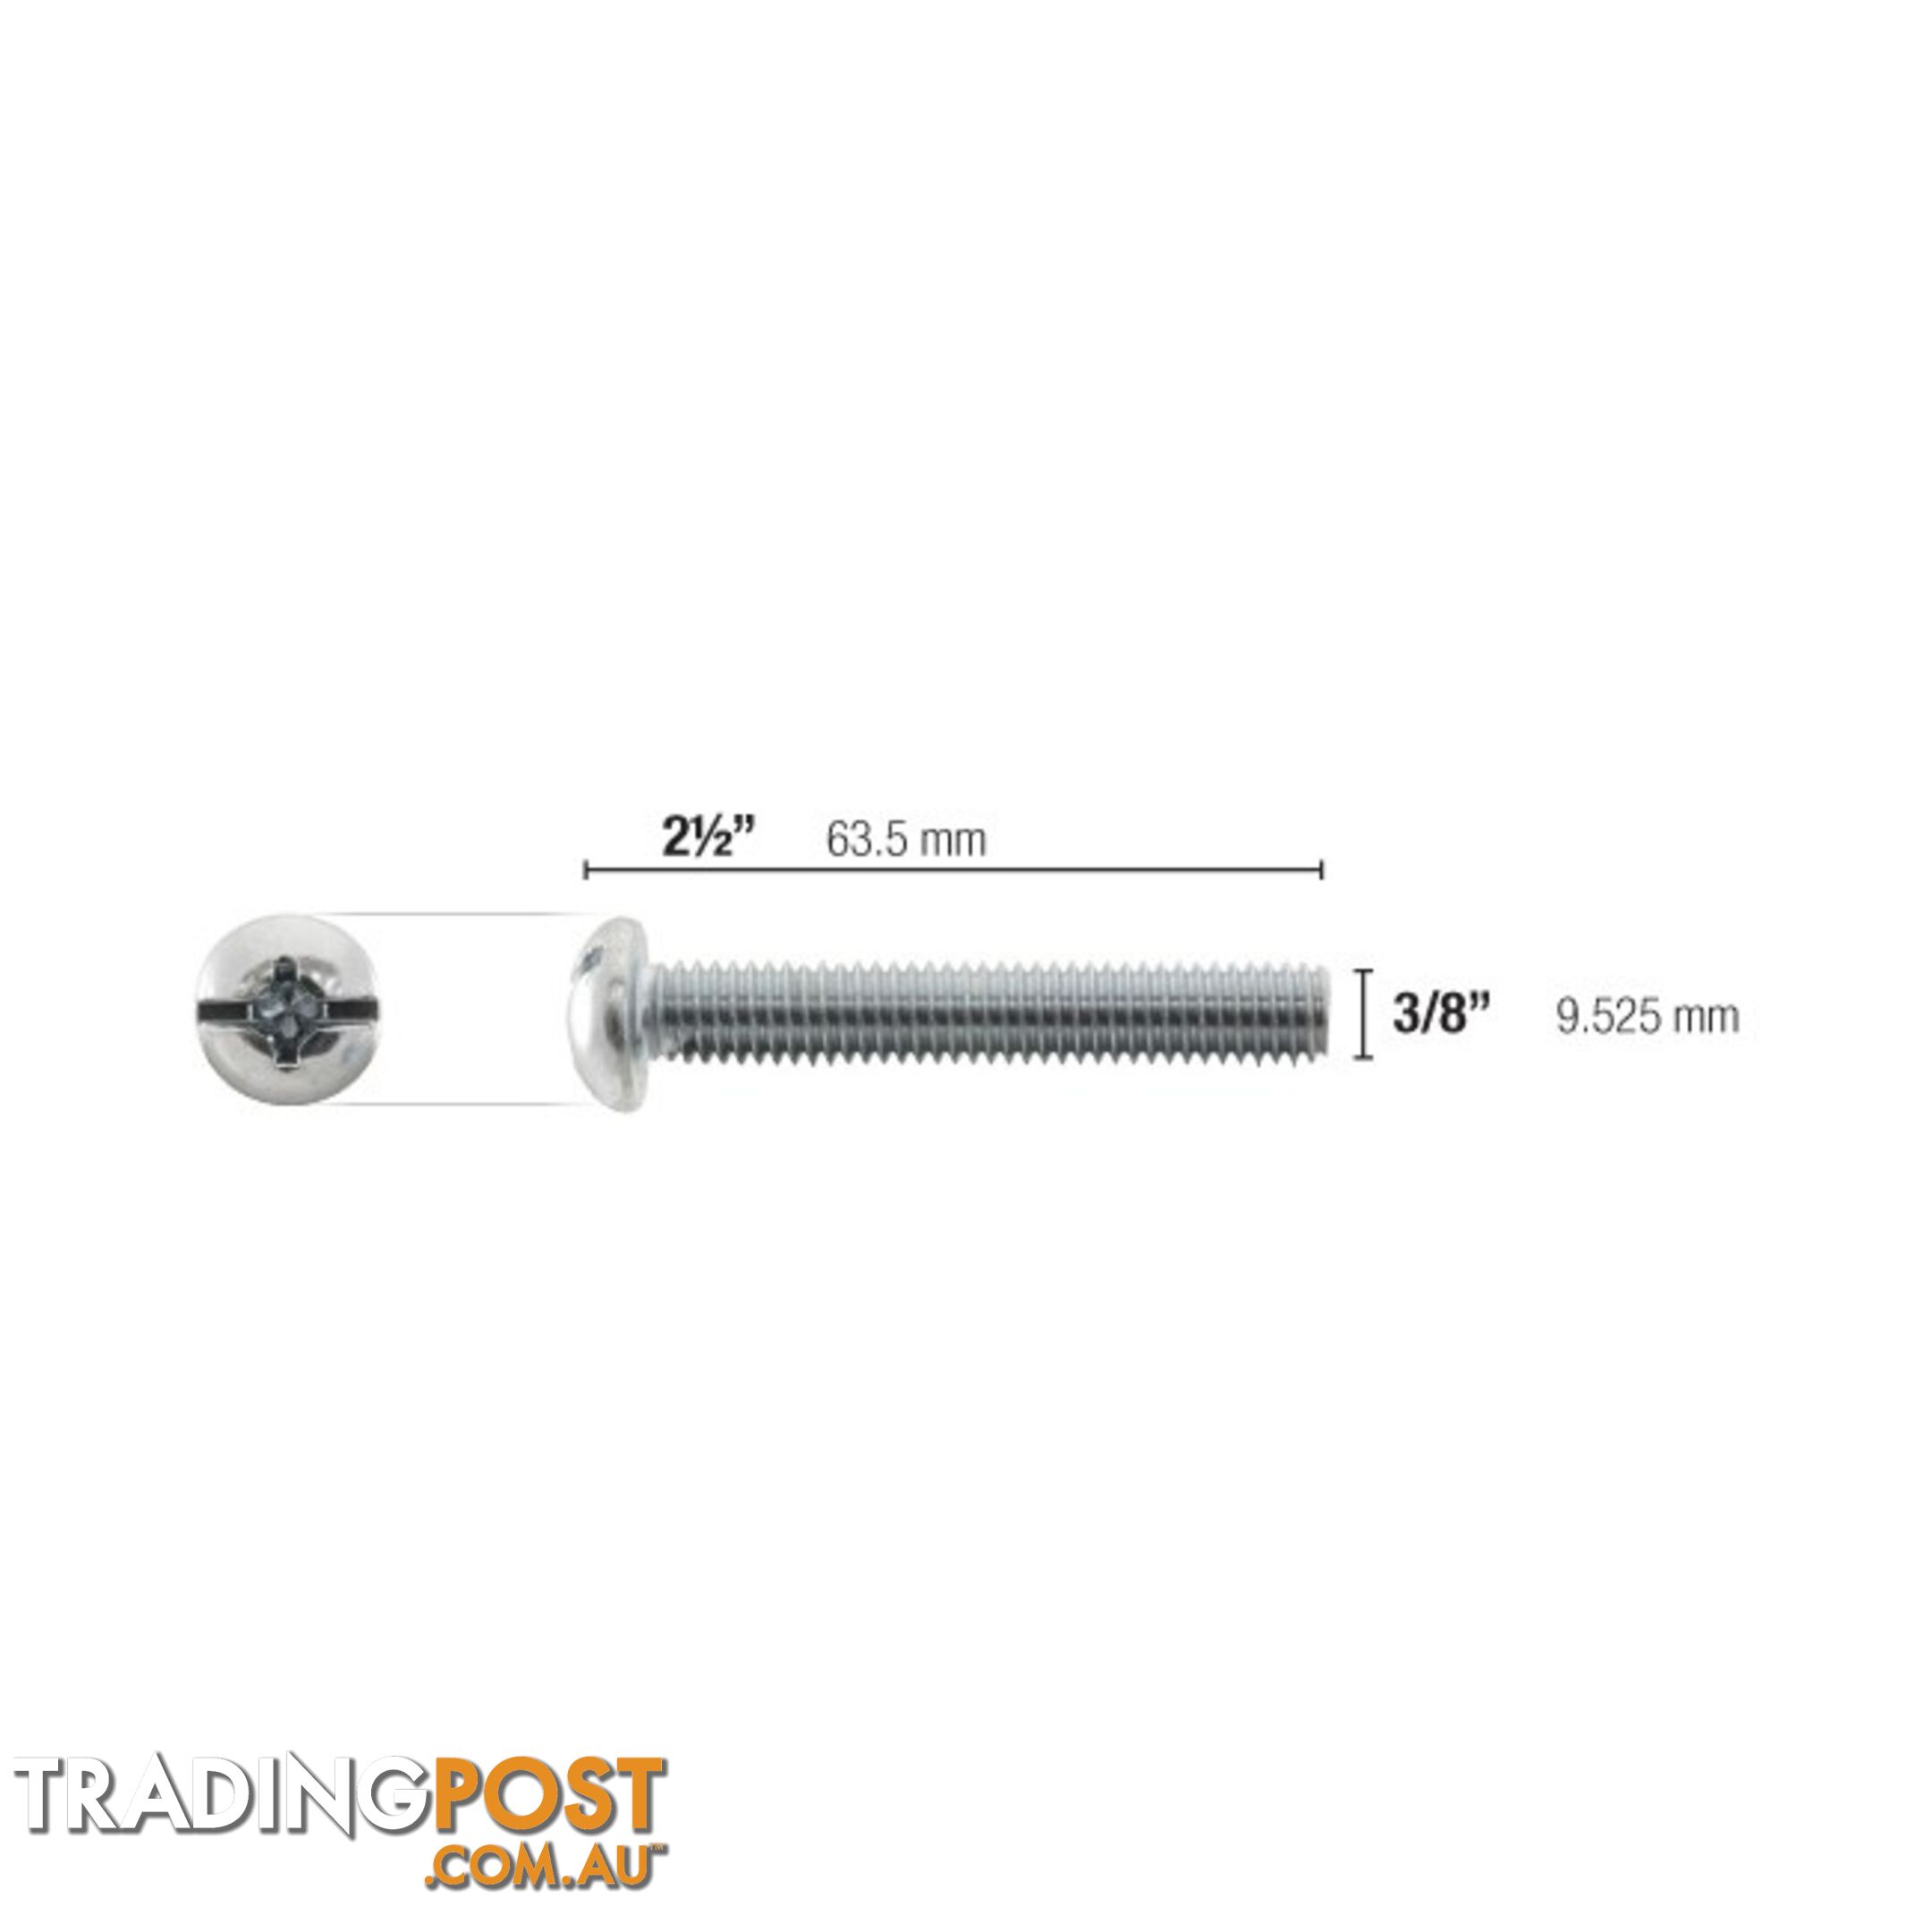 TS38X212 3/8" 2-1/2" BOLT FOR TOGGLER